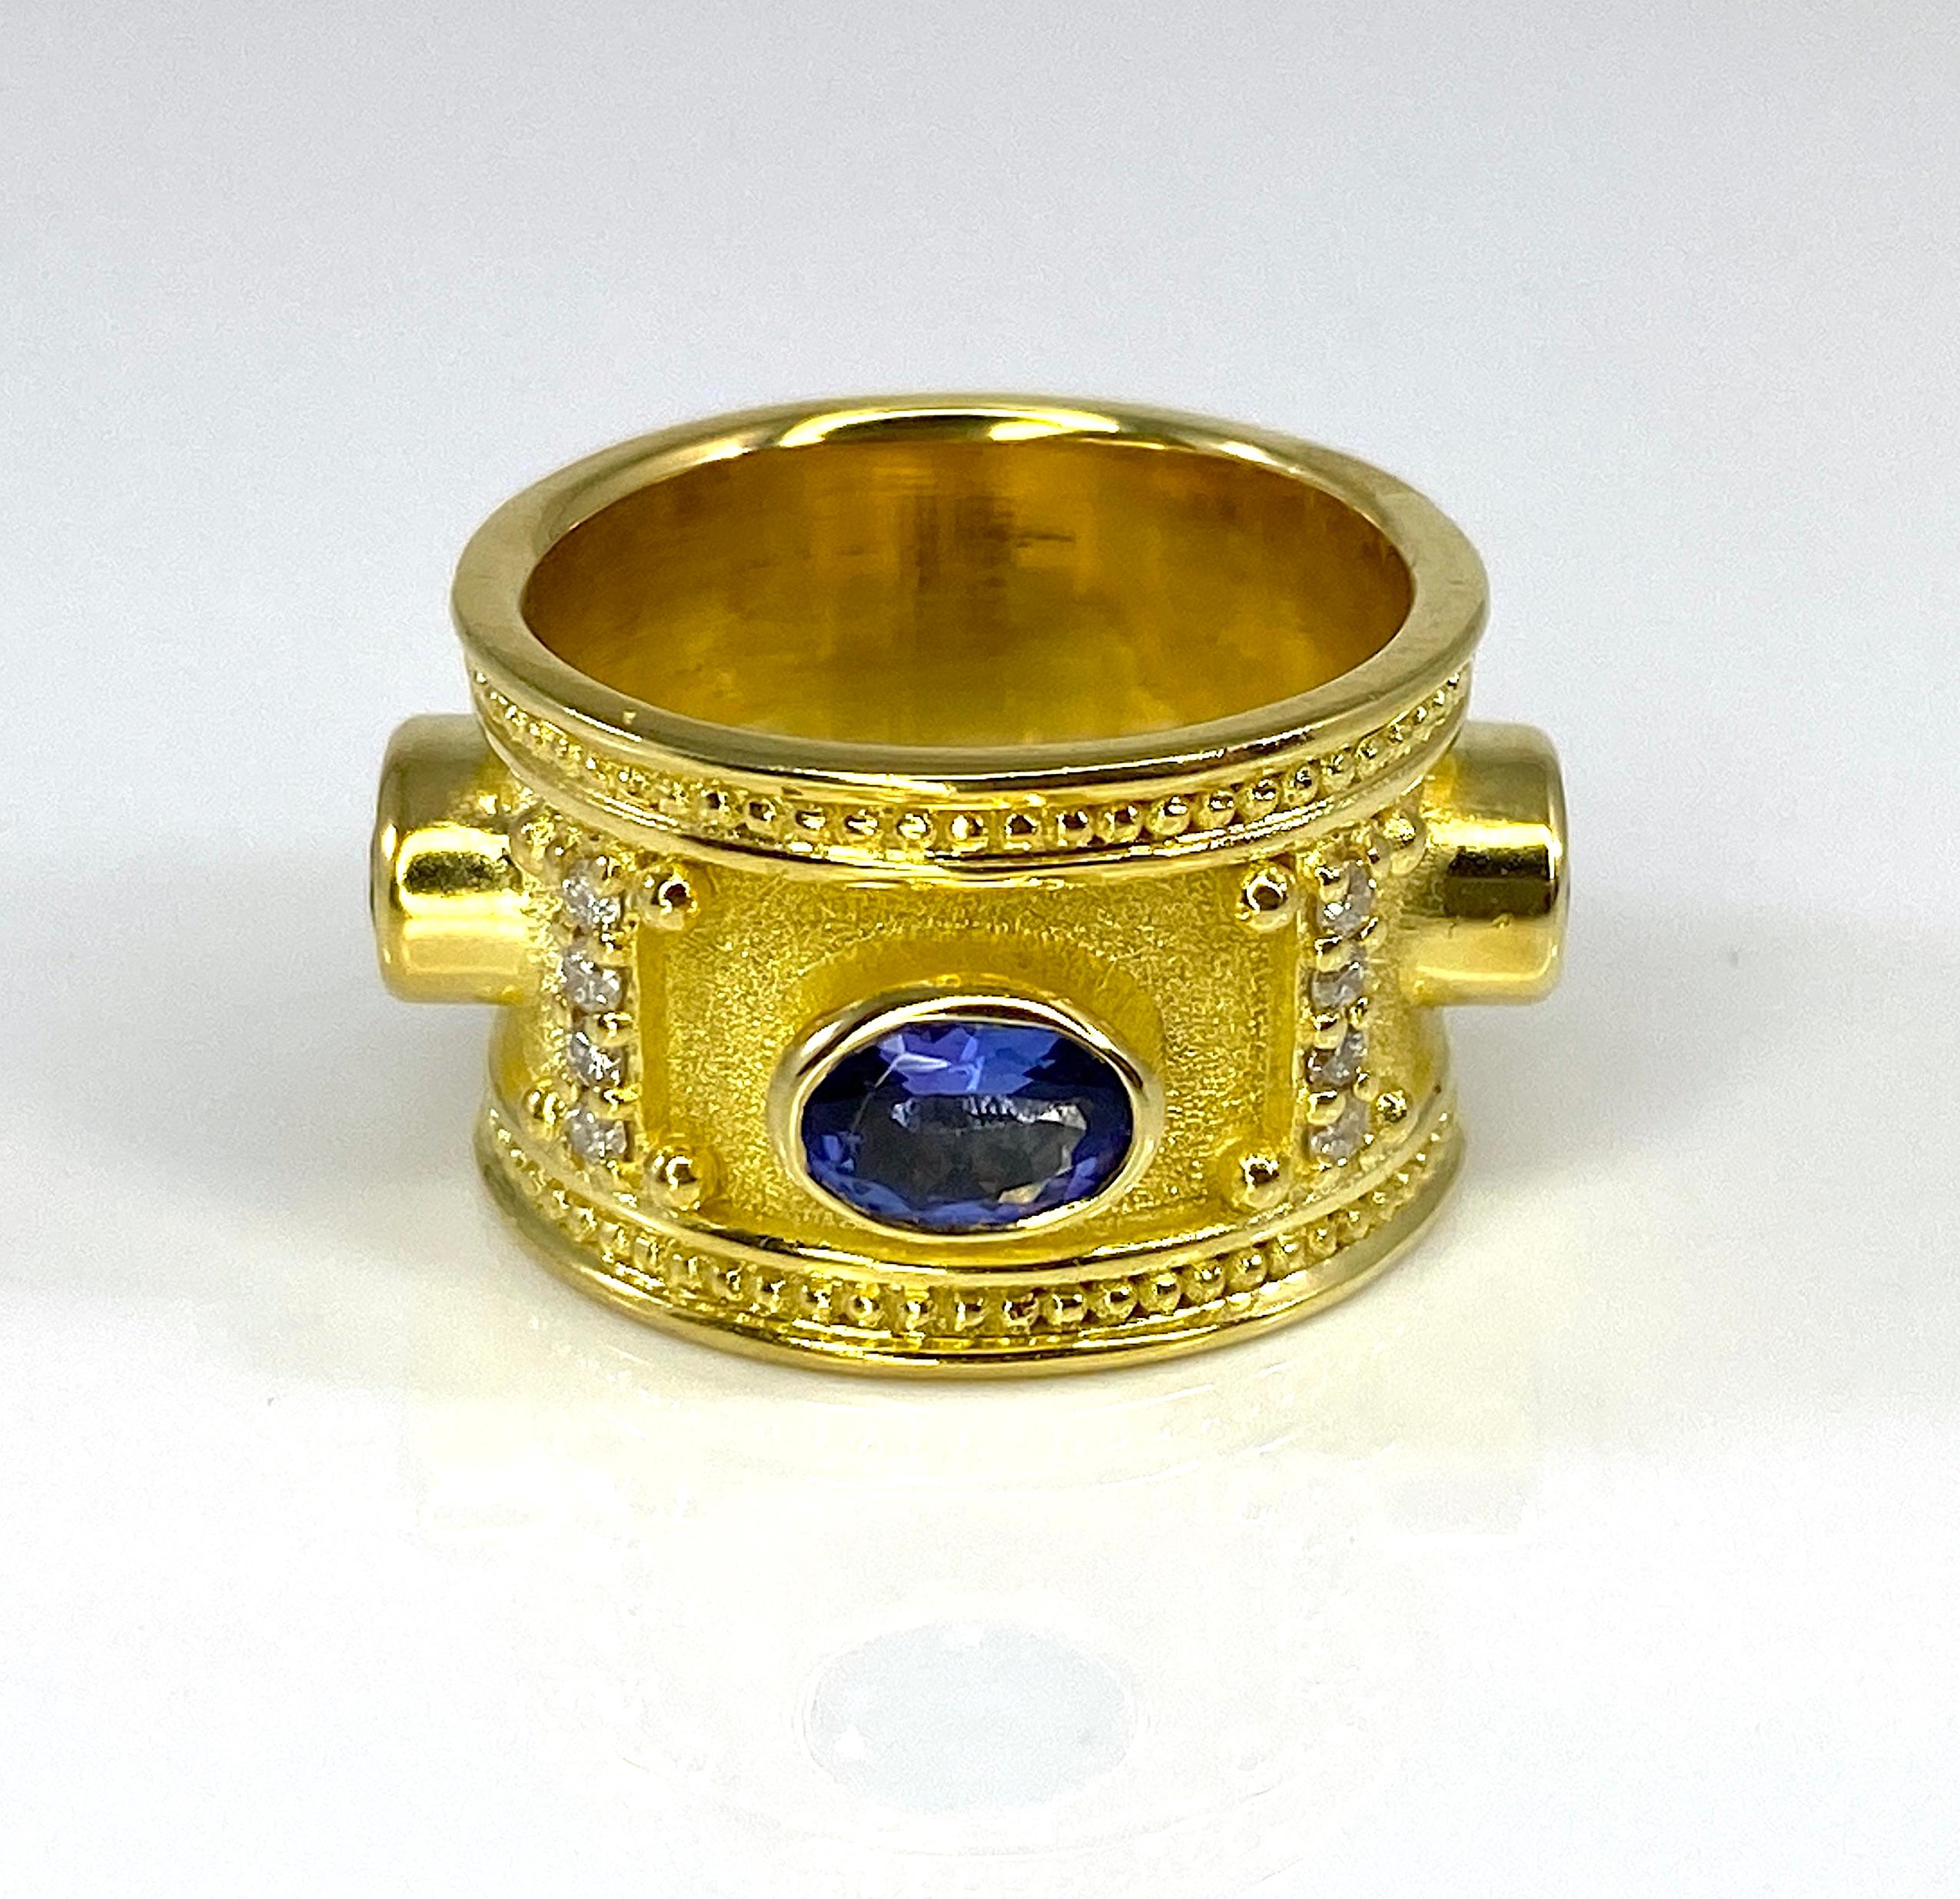 The is gorgeous S.Georgios designer 18 Karat Solid Yellow Gold Wide Band Ring all handmade in Greece in the elegant look inspired by Byzantine era. Ring is heavily decorated with granulation details and features 4 oval cut Tanzanites in total weight